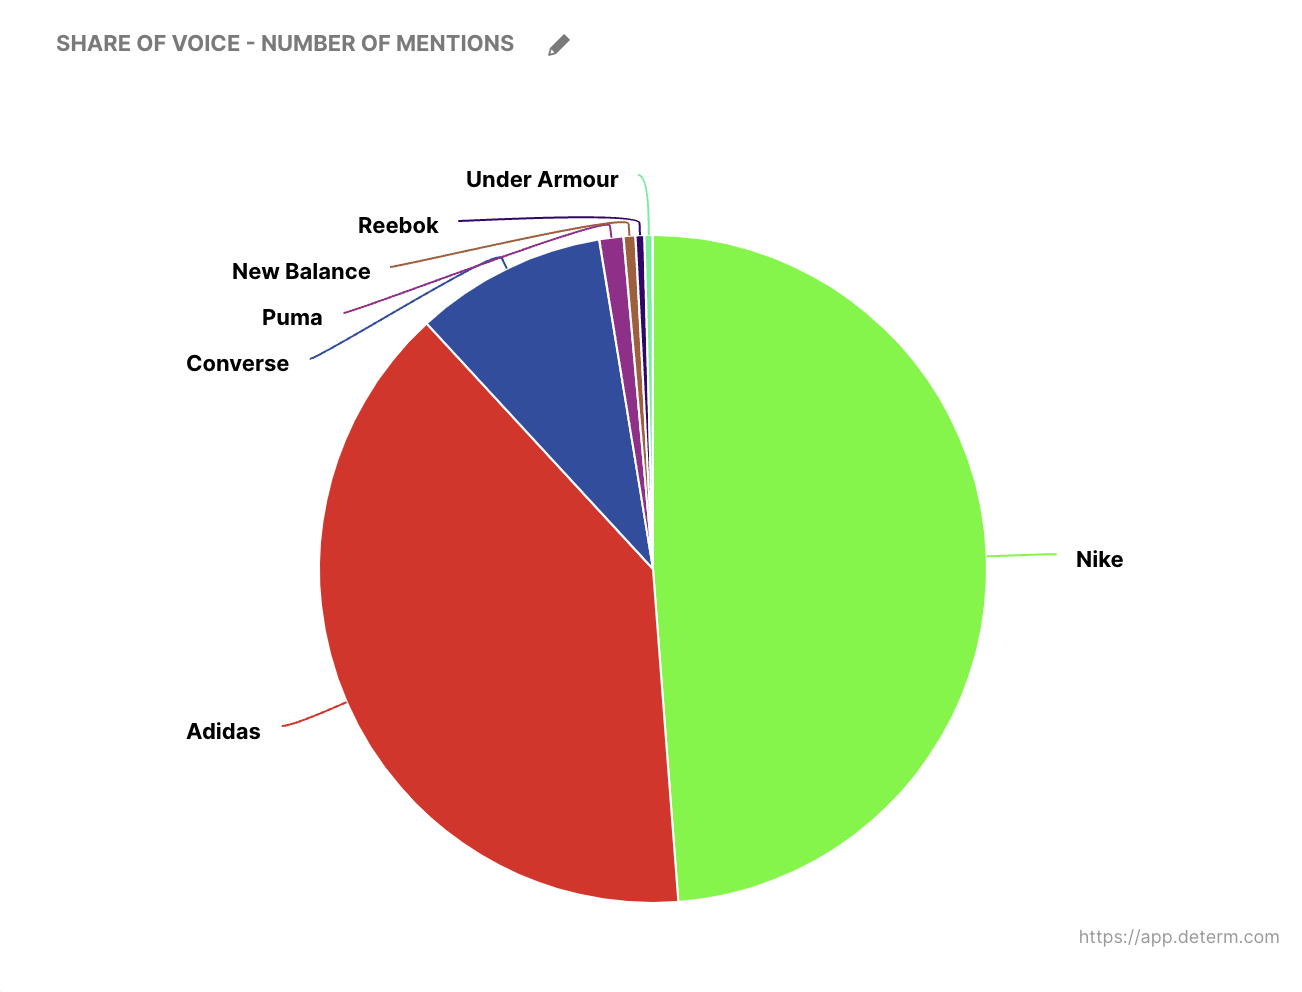 Share of voice as an industry benchmarking metric